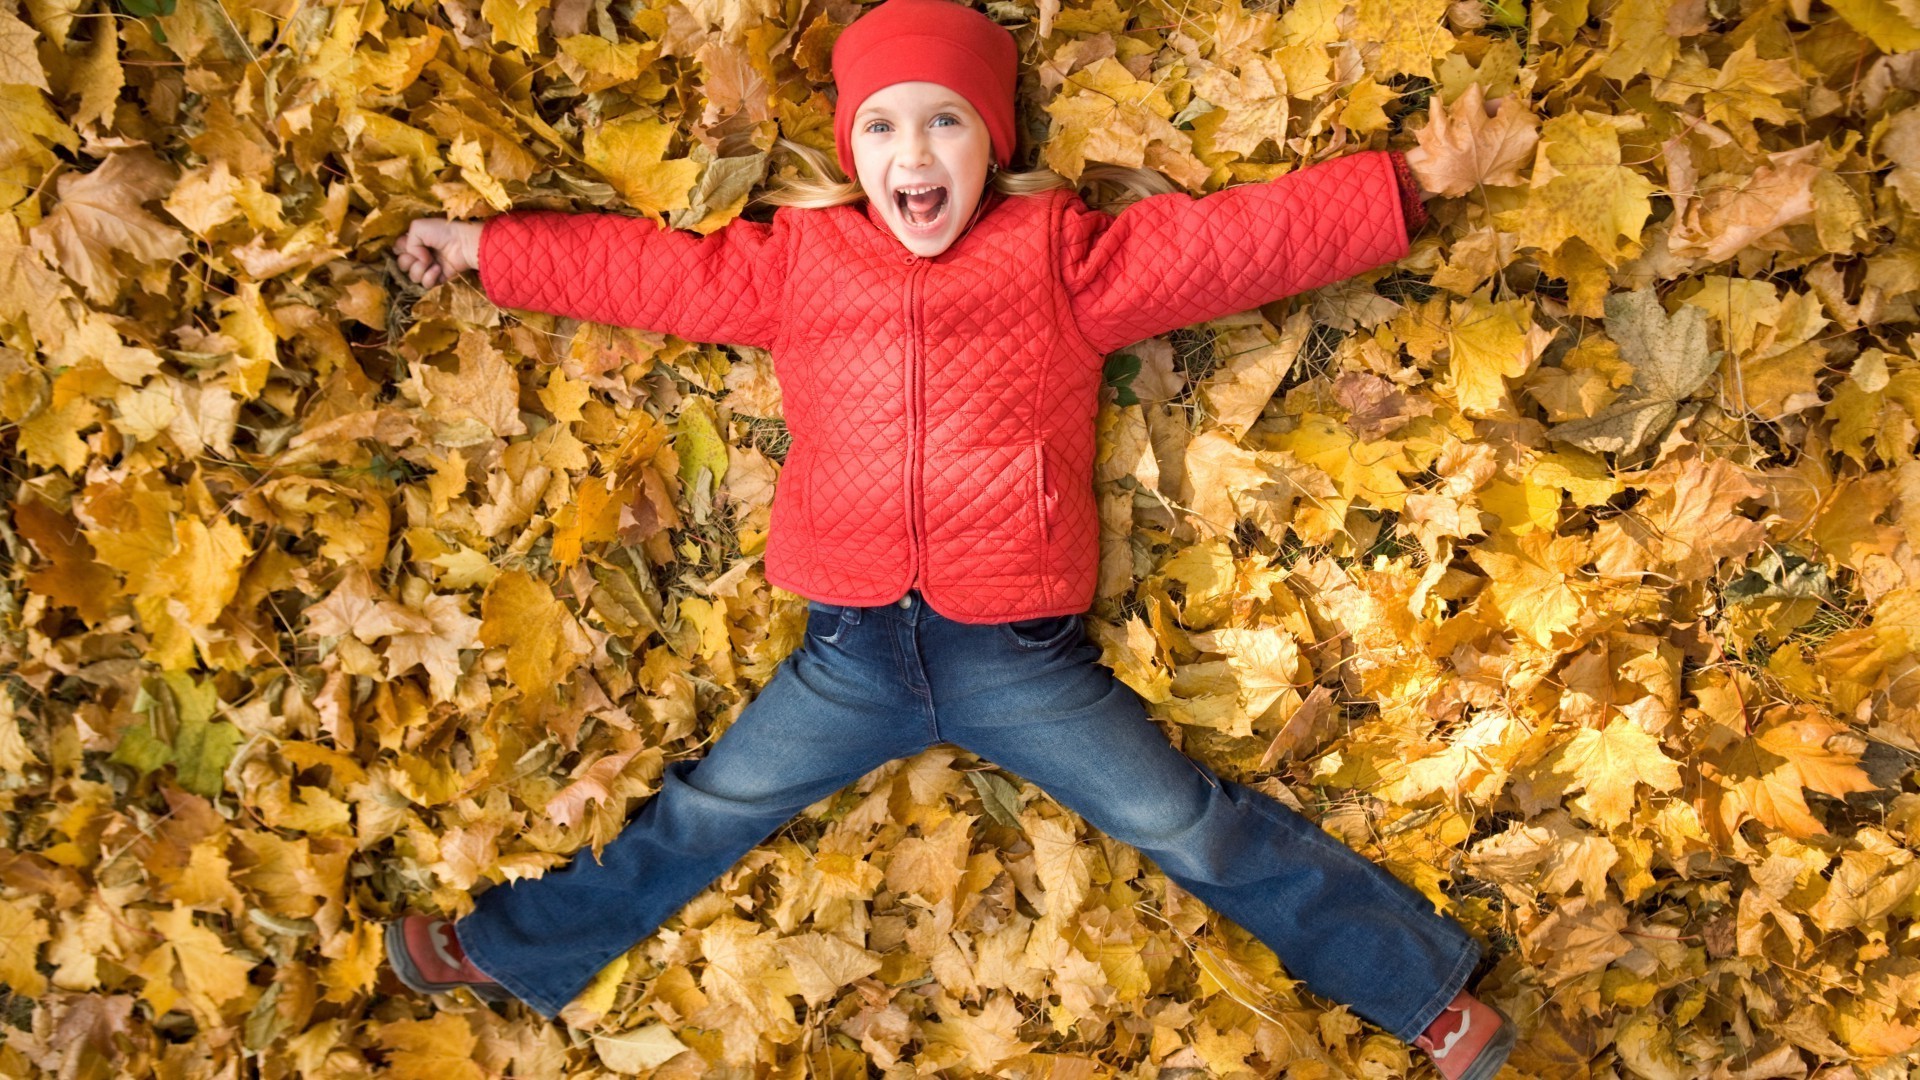 laughing children fall maple nature park season outdoors gold leaf fun healthy leisure happiness young outside thanksgiving girl